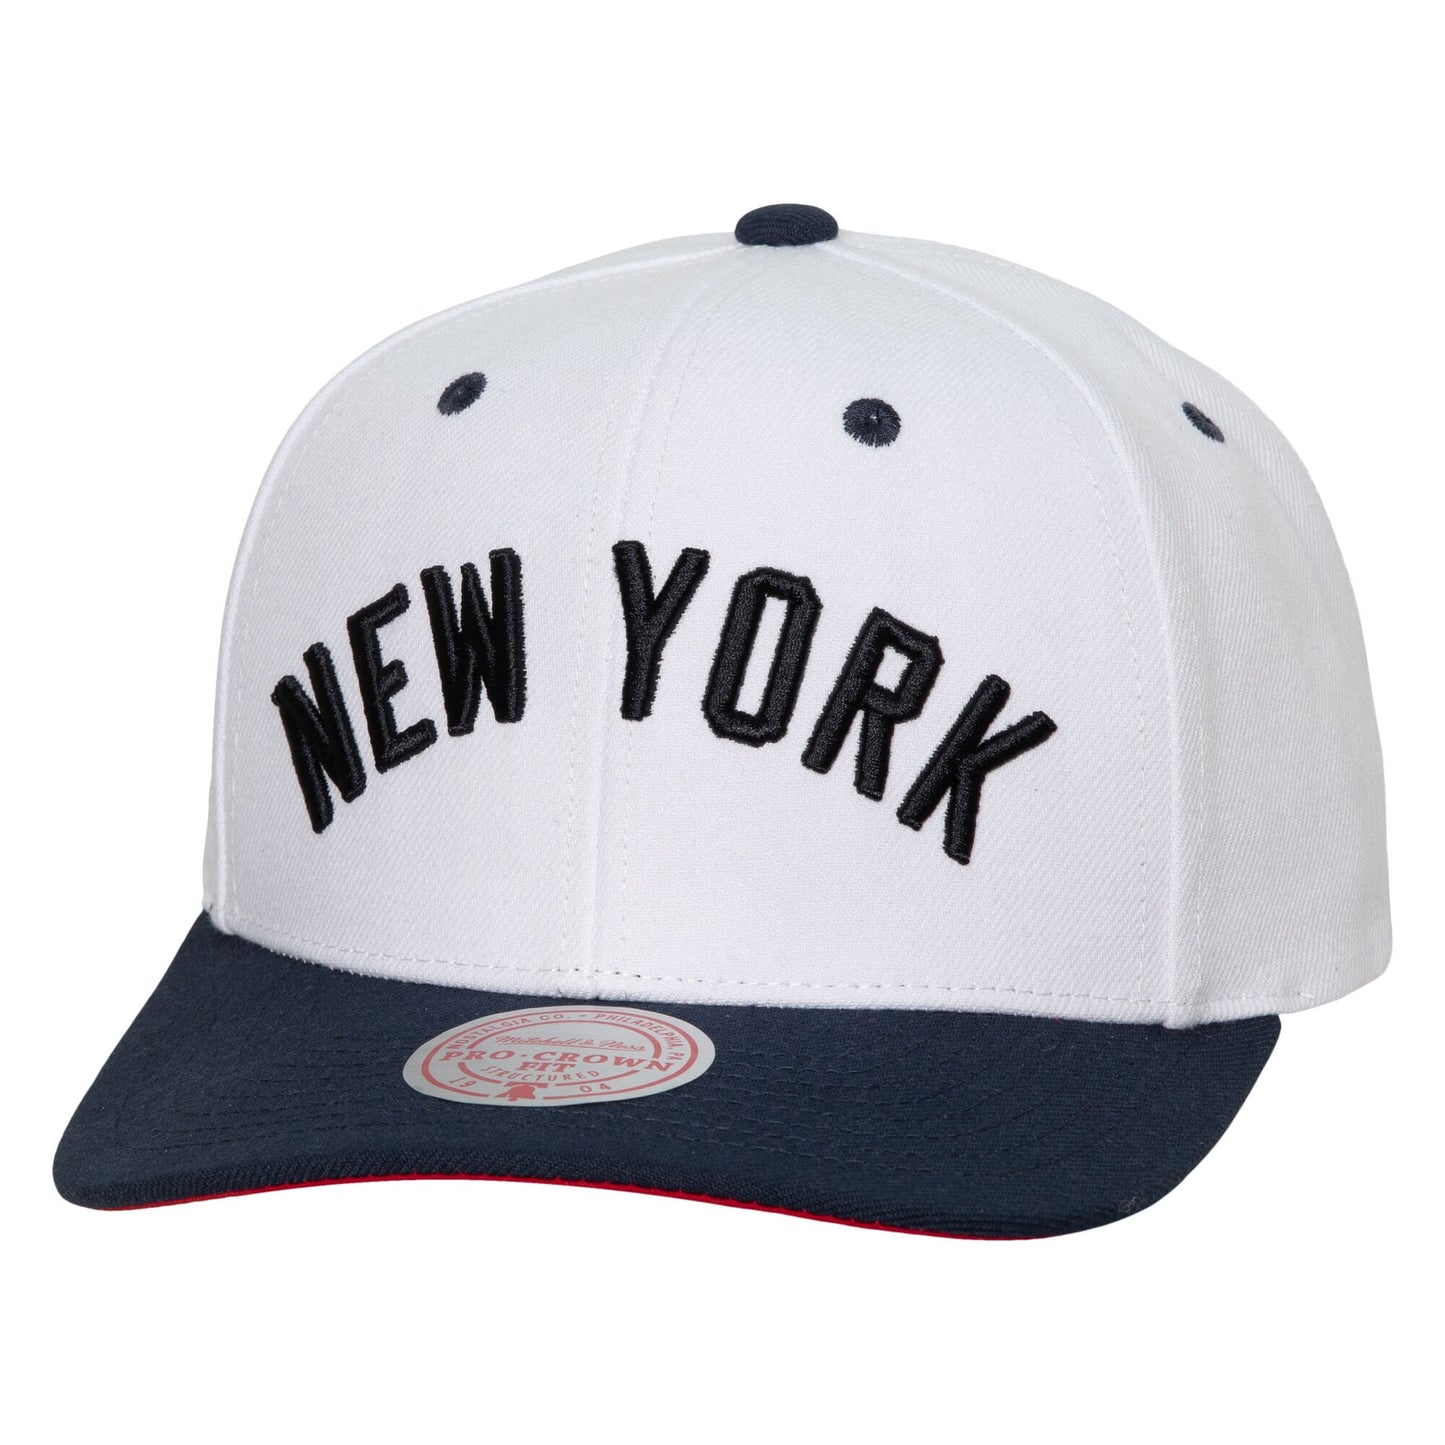 New York Yankees Mitchell & Ness Cooperstown Collection Pro Crown Snapback Hat - White